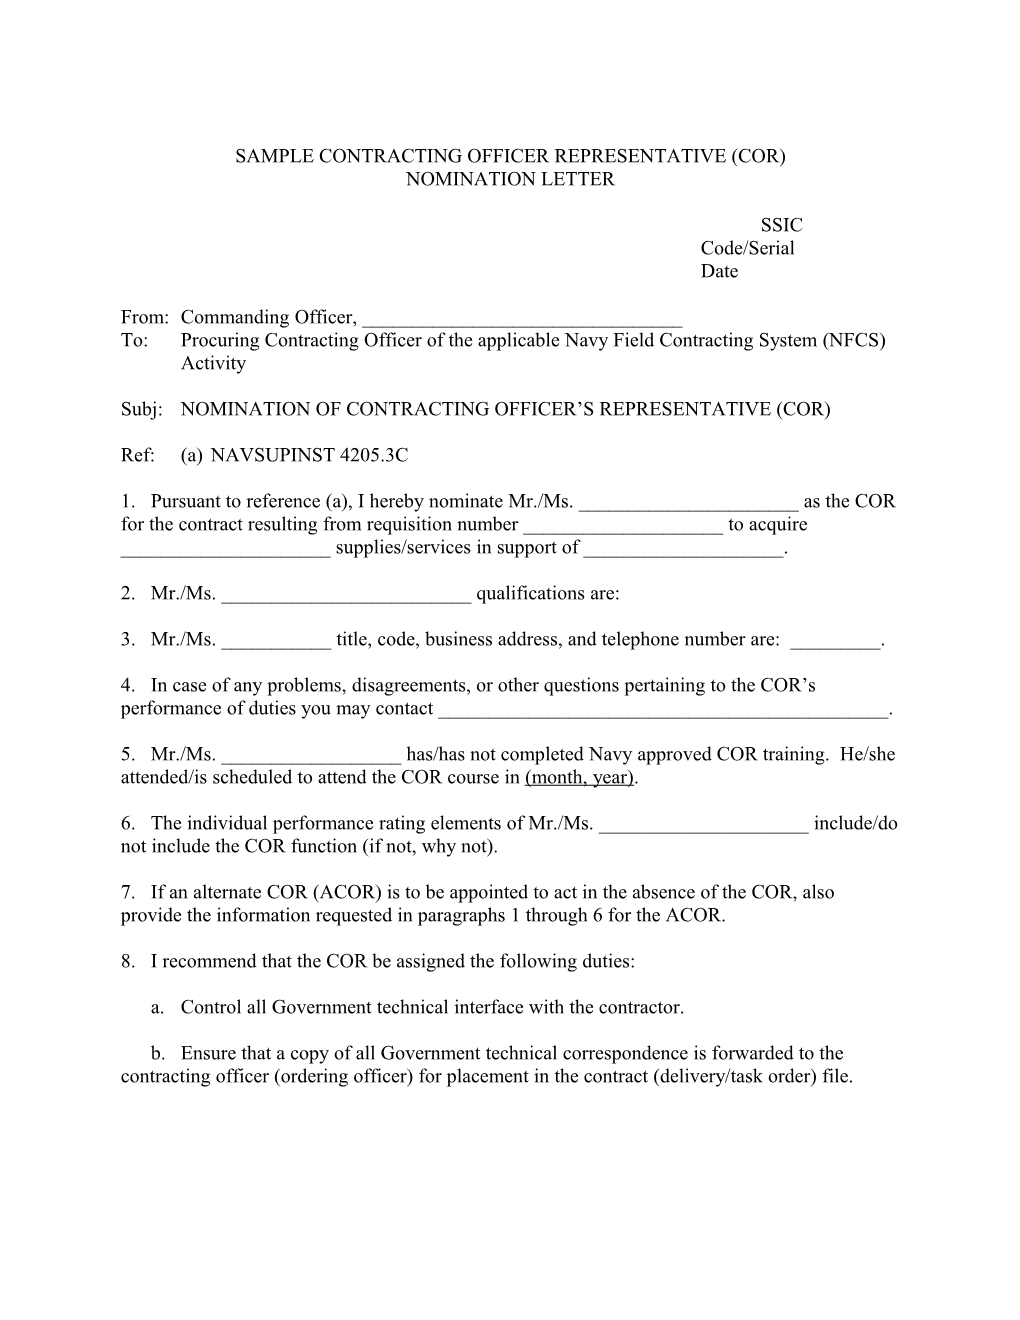 Sample Contracting Officer Representative (Cor) Nomination Letter